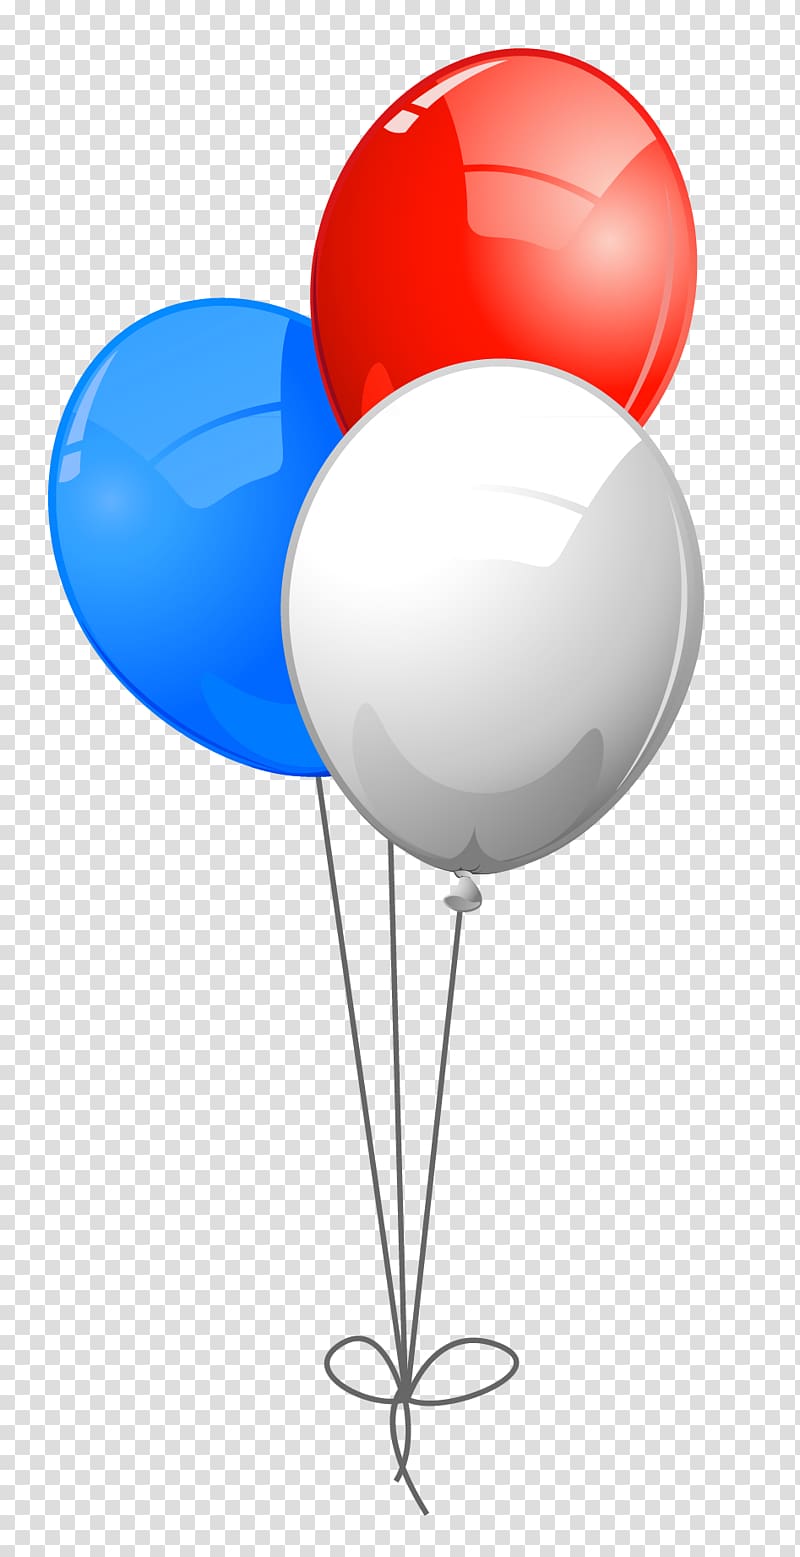 Blue And White Balloons Clip Art